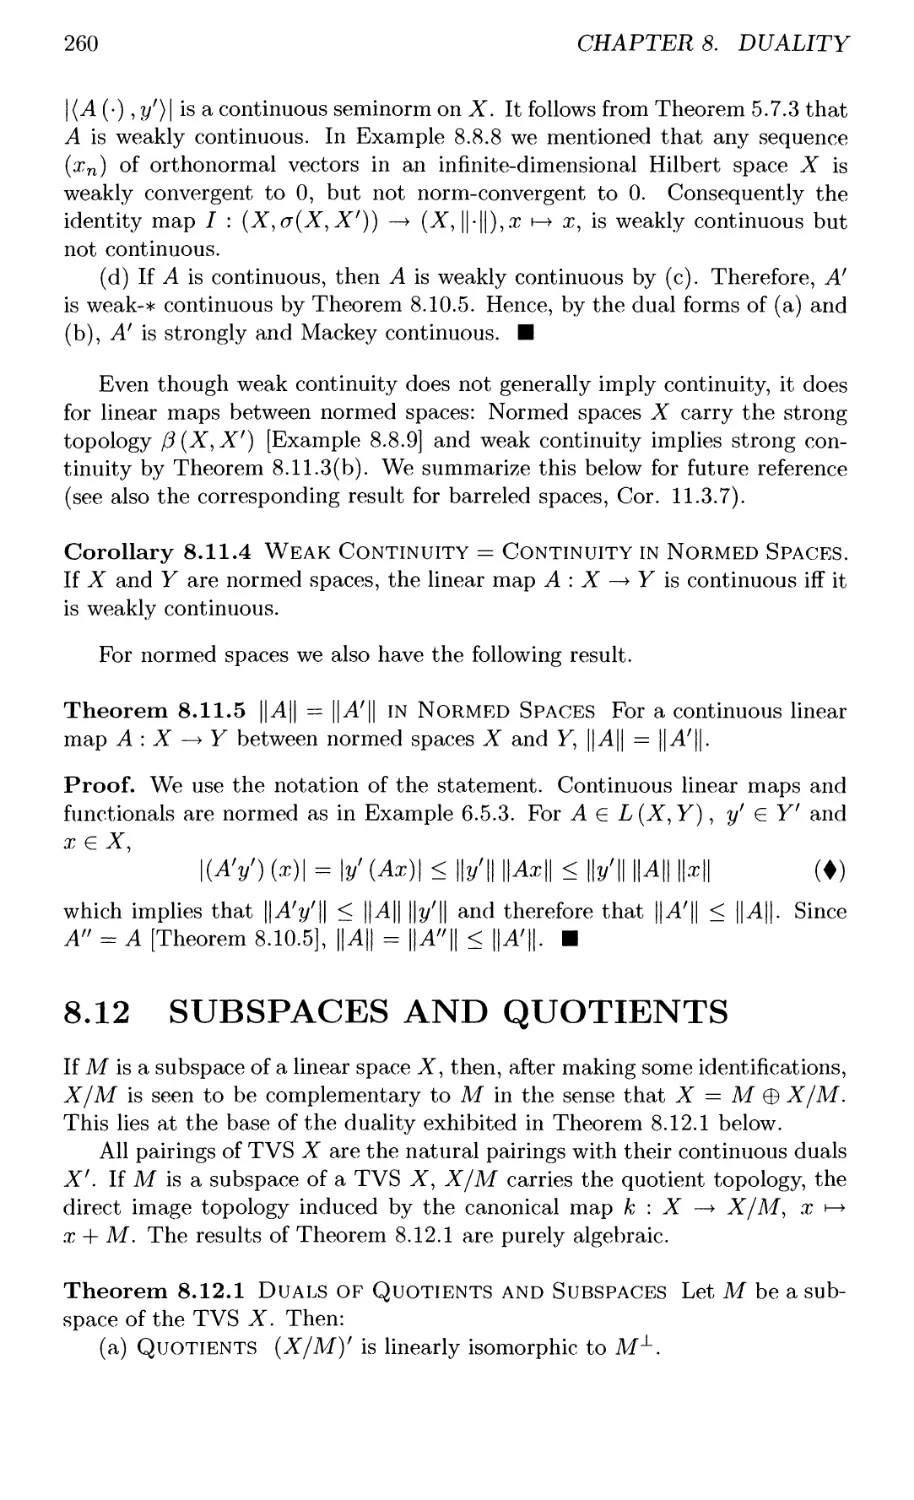 8.12 SUBSPACES AND QUOTIENTS